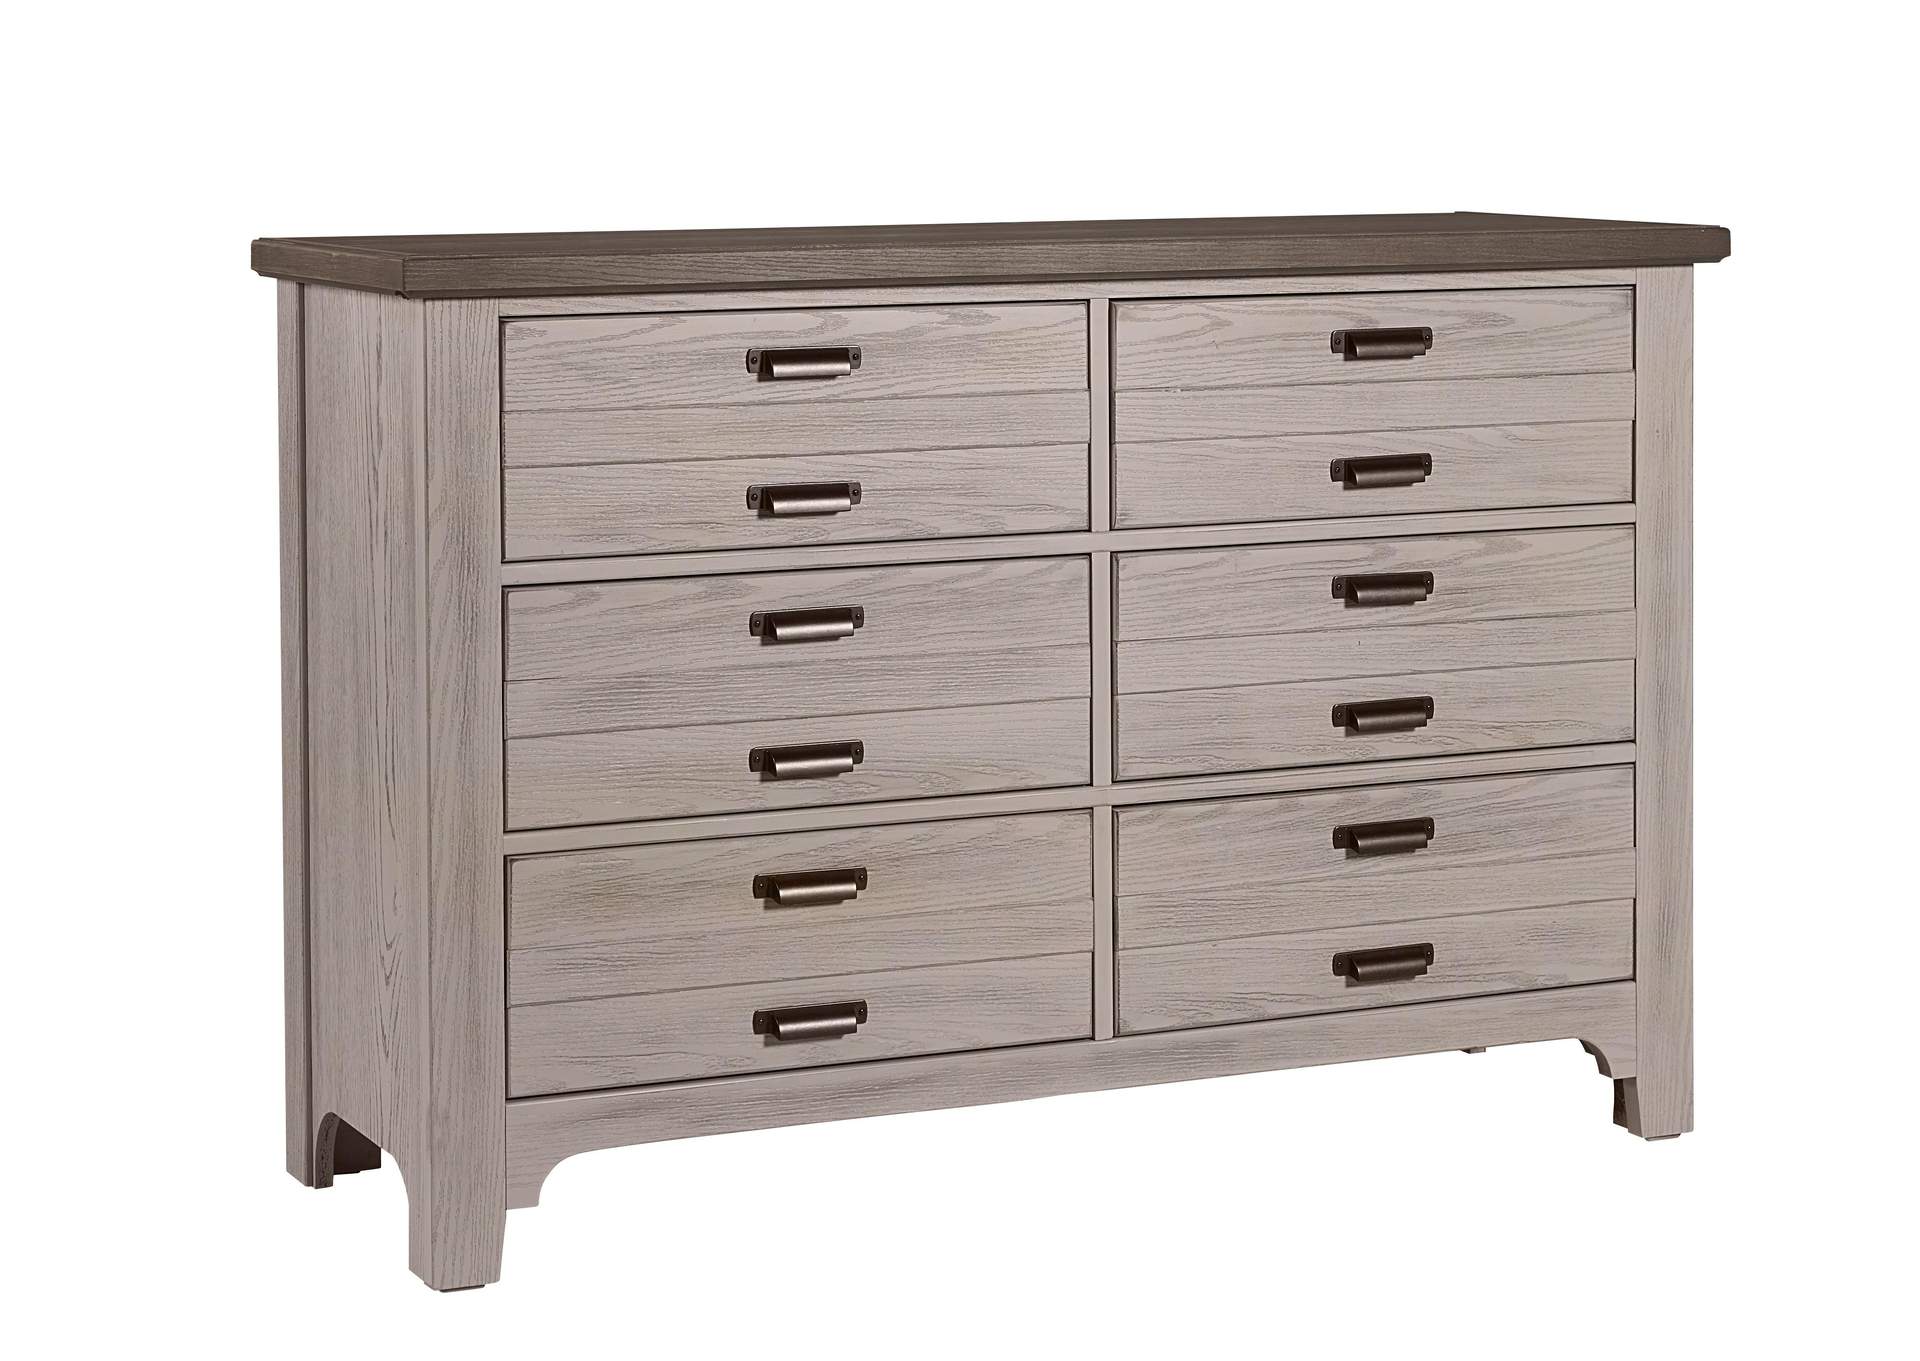 Bungalow Dover Grey with Folkstone Top Double Dresser - 6 Drawer,Vaughan-Bassett